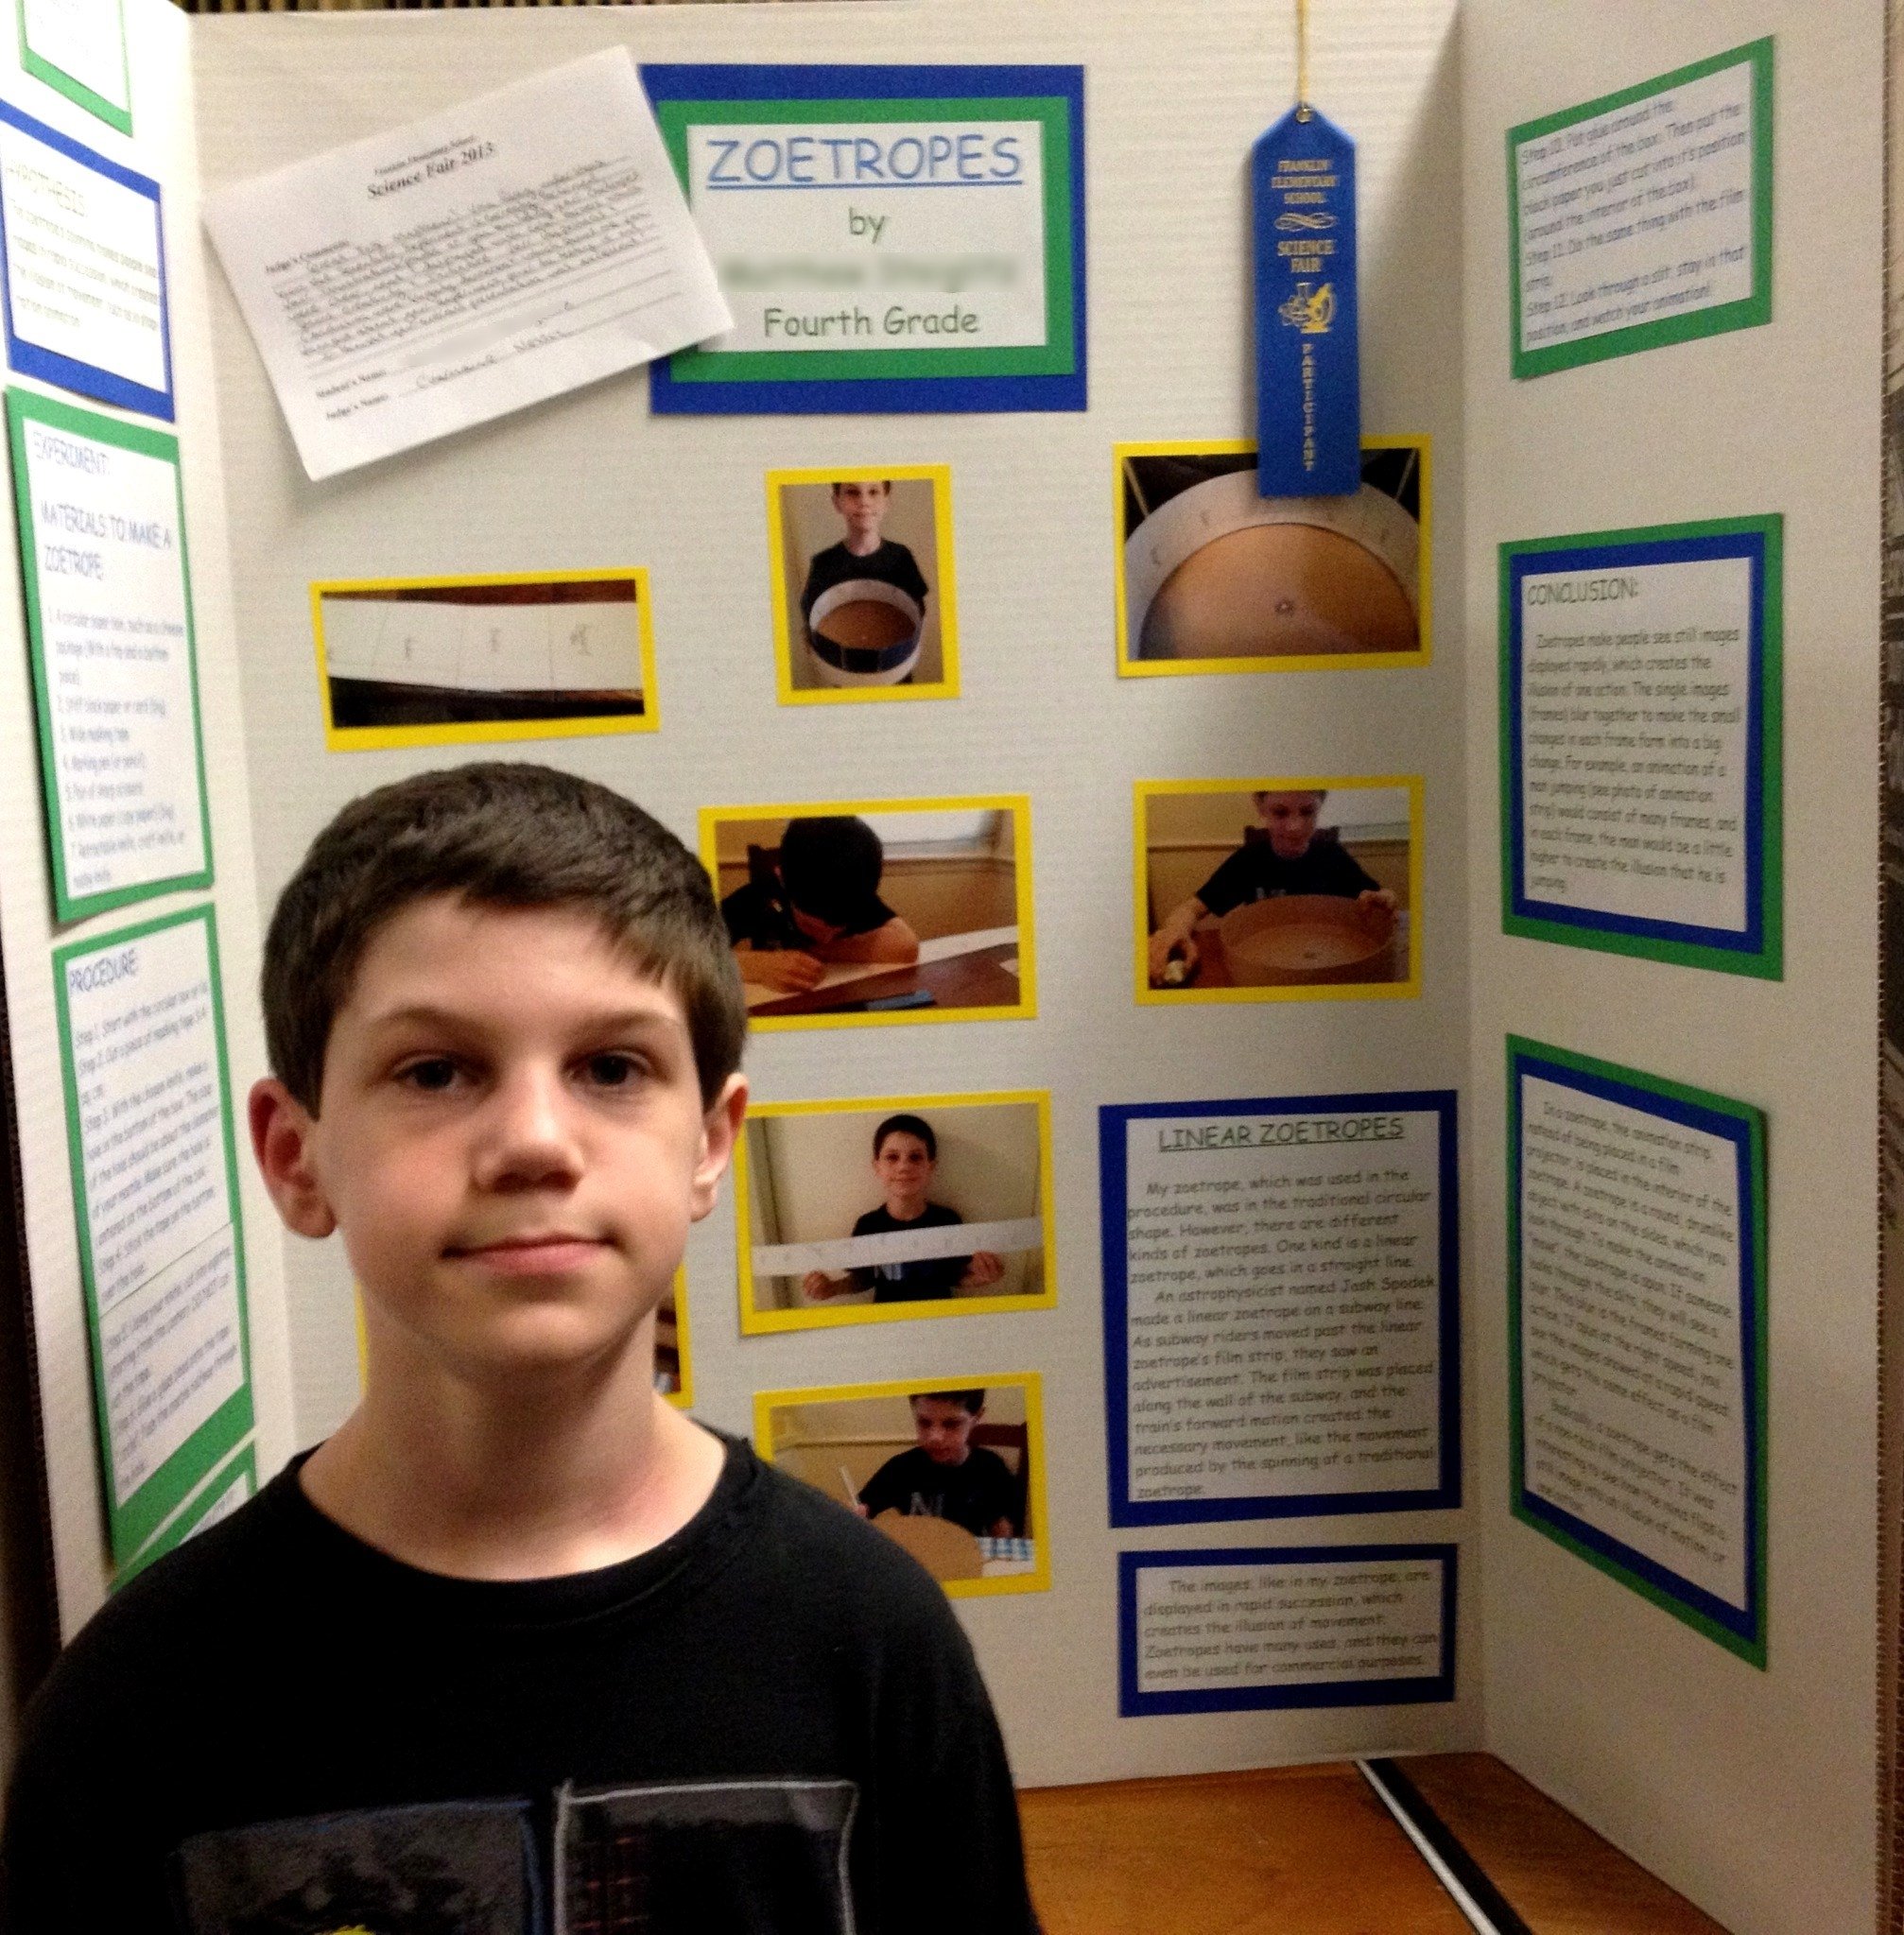 10 Famous Science Fair Projects Ideas For 4Th Graders zoetropes in a fourth grade science fair joshua spodek 2022